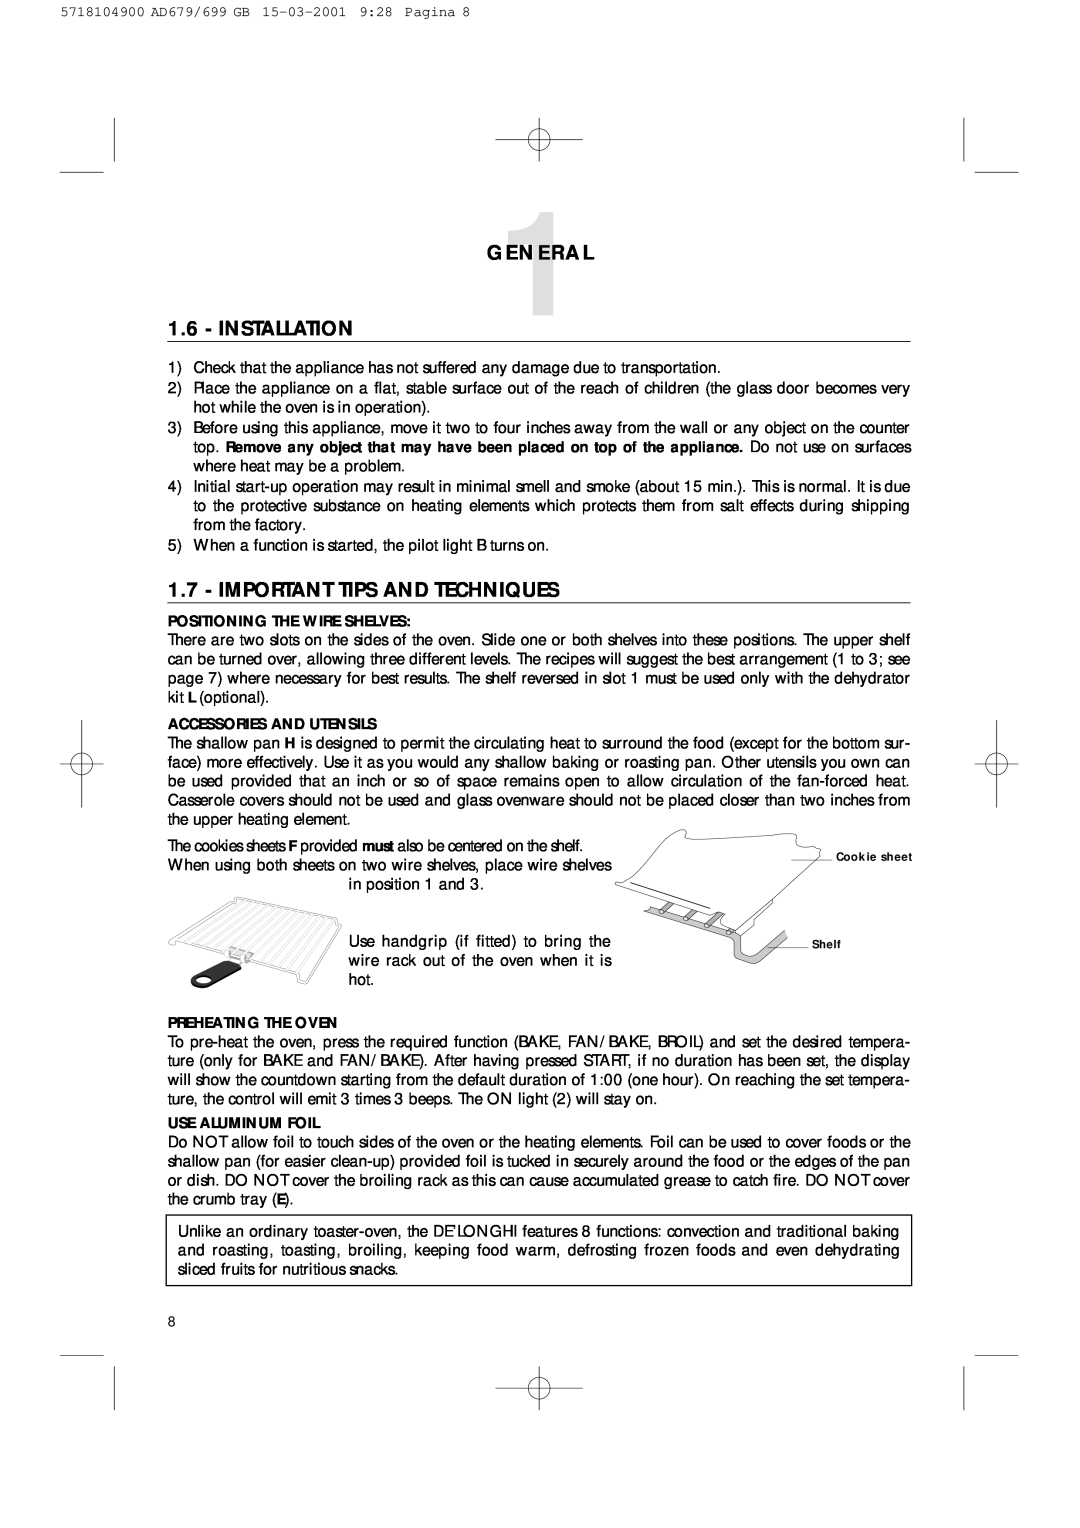 DeLonghi AD679/699 manual GENERAL1 1.6 - INSTALLATION, Important Tips And Techniques 